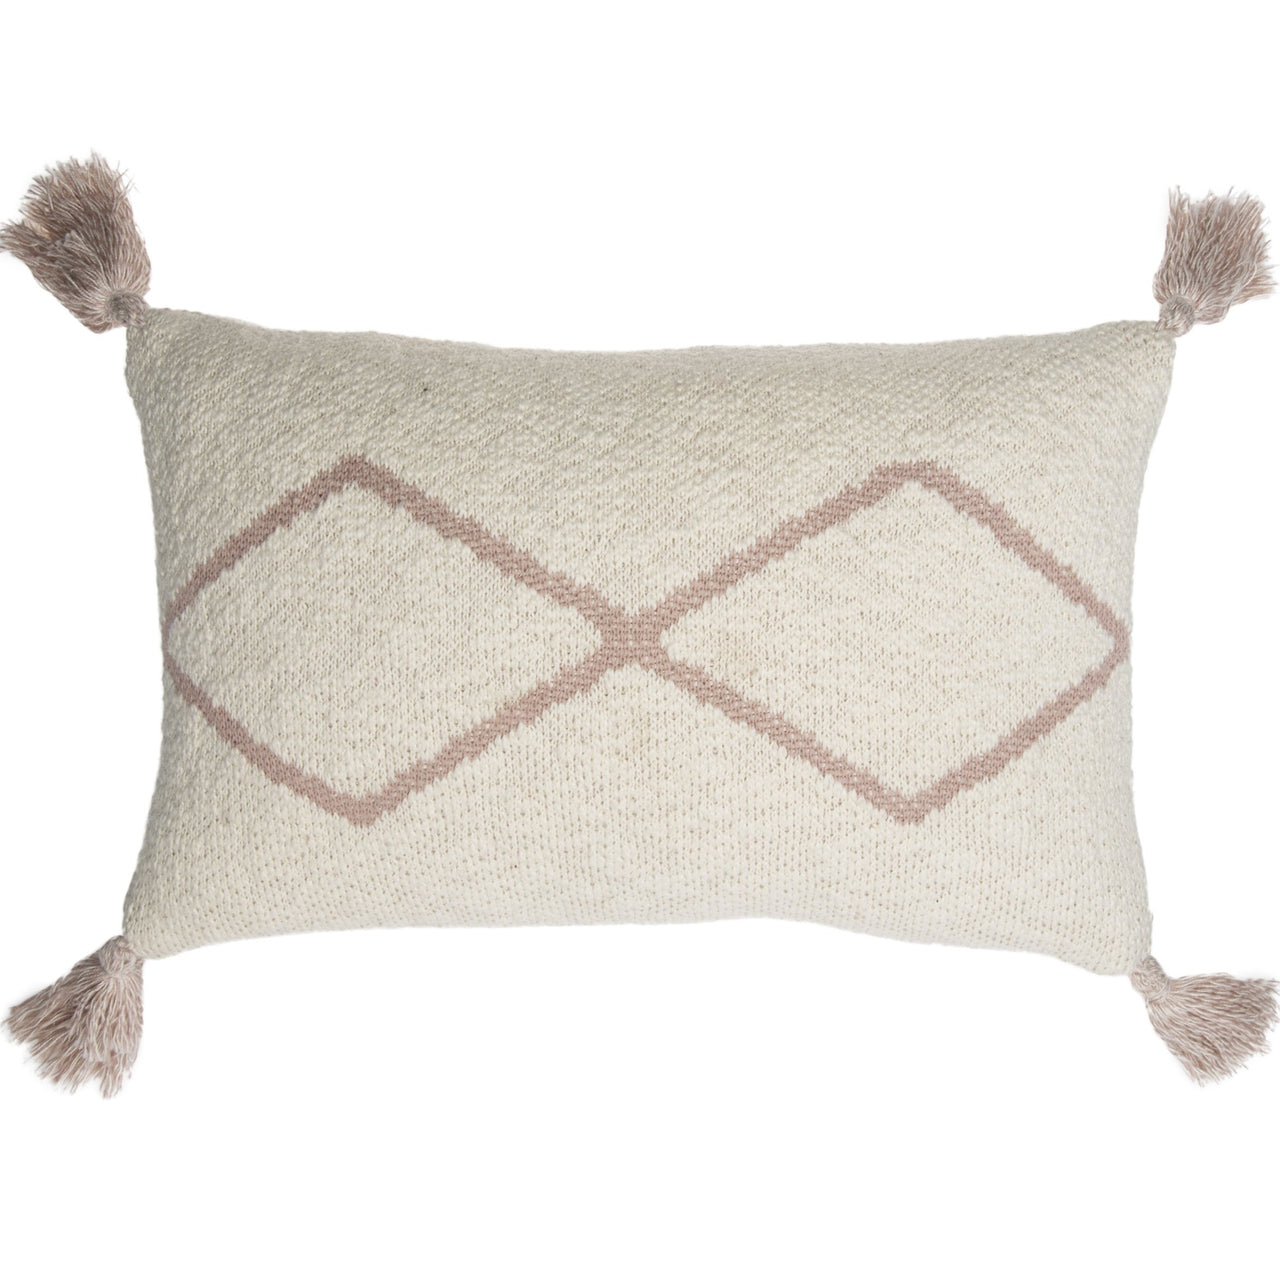 Little Oasis Knitted Washable Cushion - Natural Pale Pink - Rooms for Rascals, a Leafy Lanes Retailers Ltd business